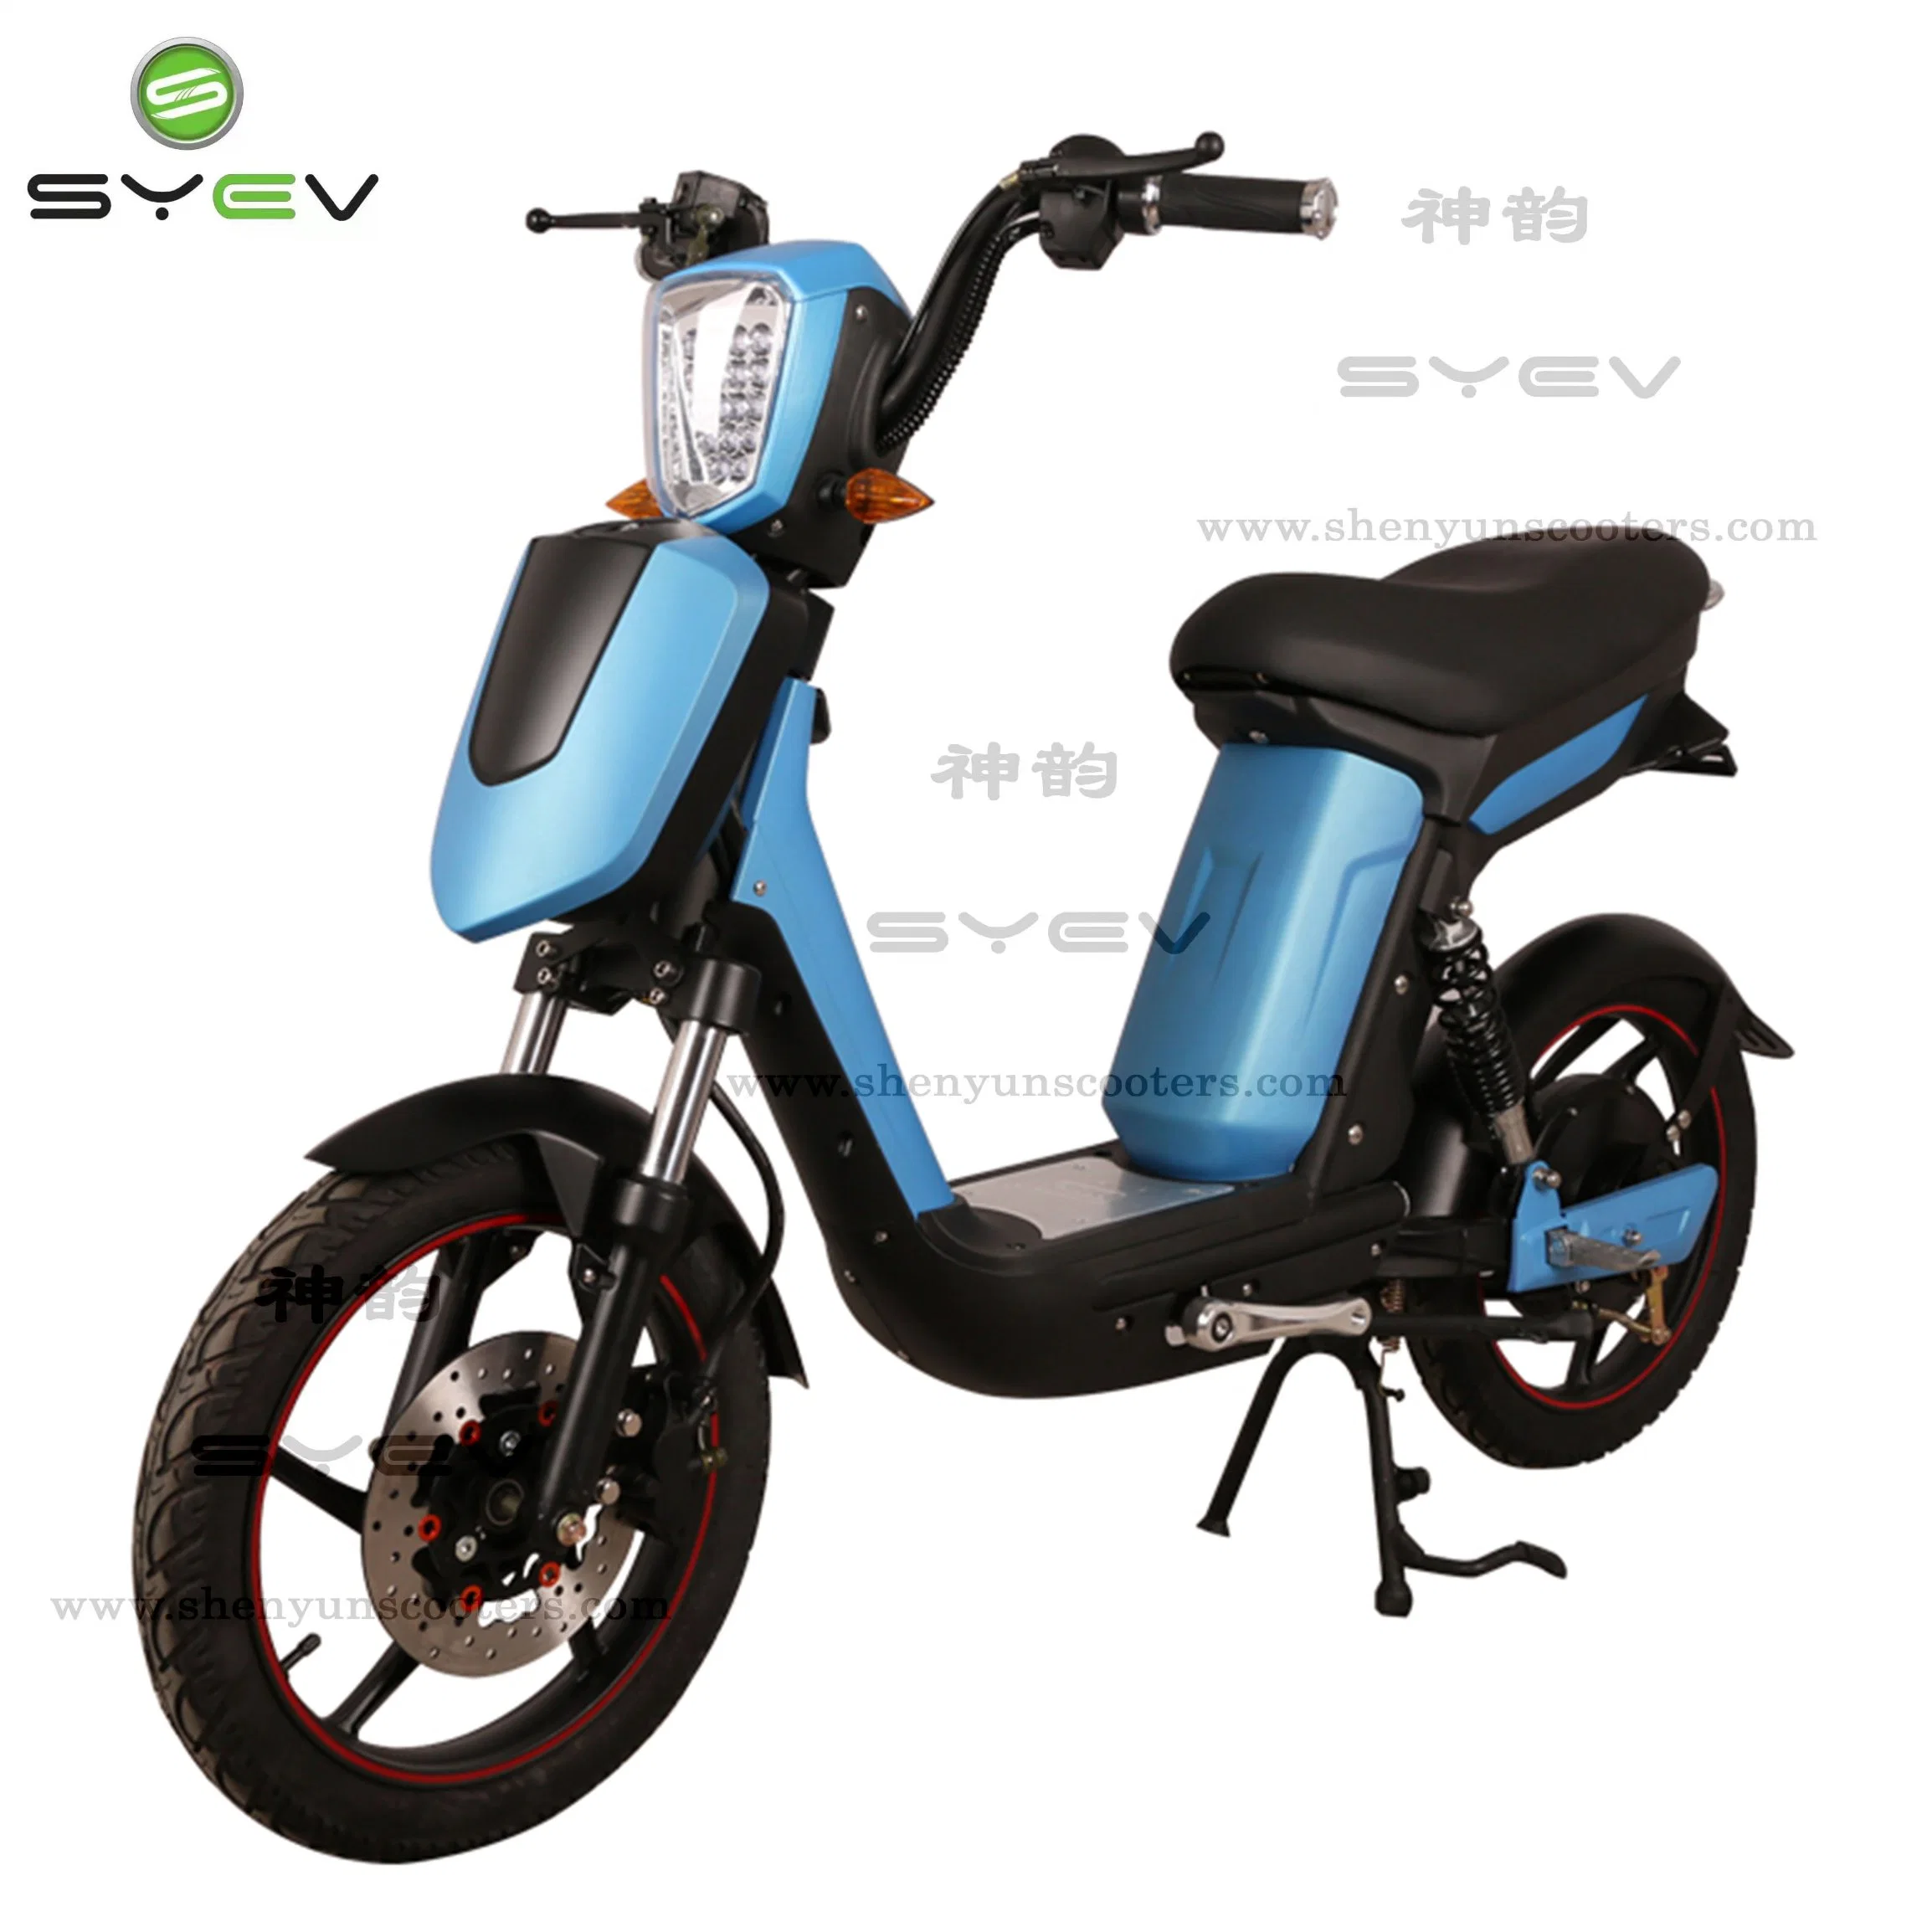 Syev Cheap Price Good Quality 500W/800W BLDC Motor Chinese Electric Motorcycle Scooter Bike with Disc /Drum Brakes